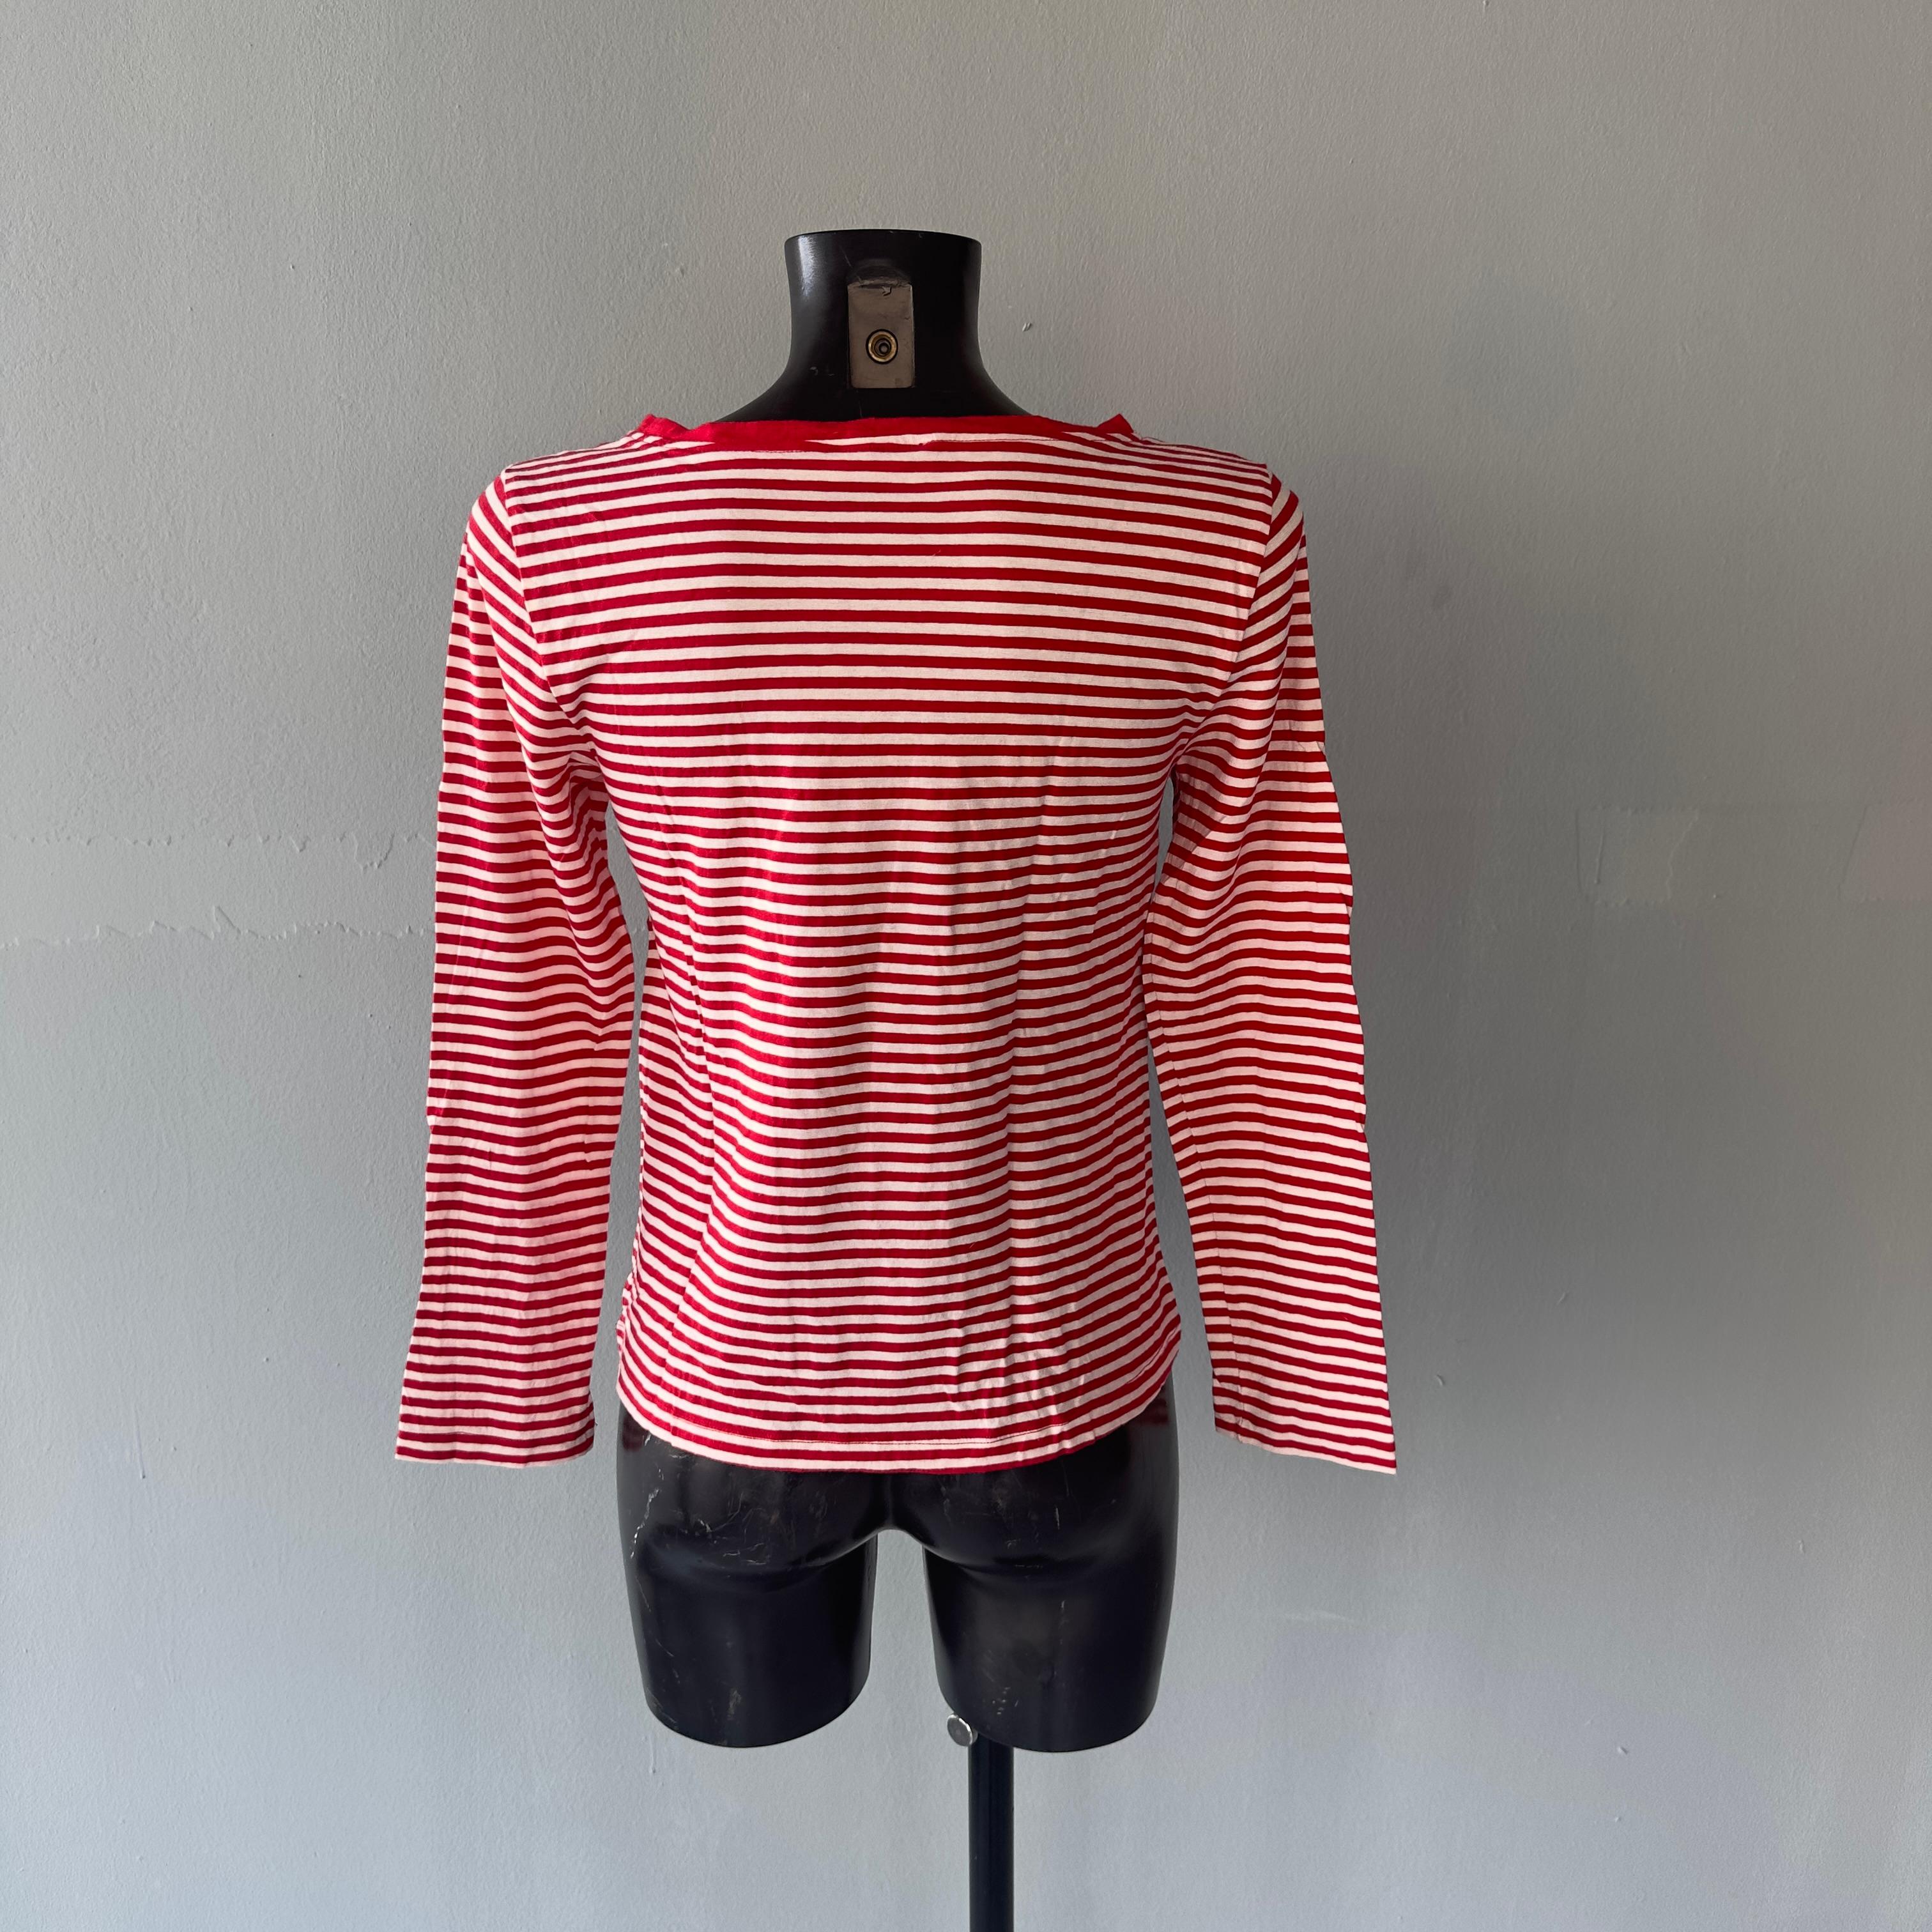 Moschino Cheap and Chic T-shirt In Excellent Condition For Sale In Basaluzzo, IT